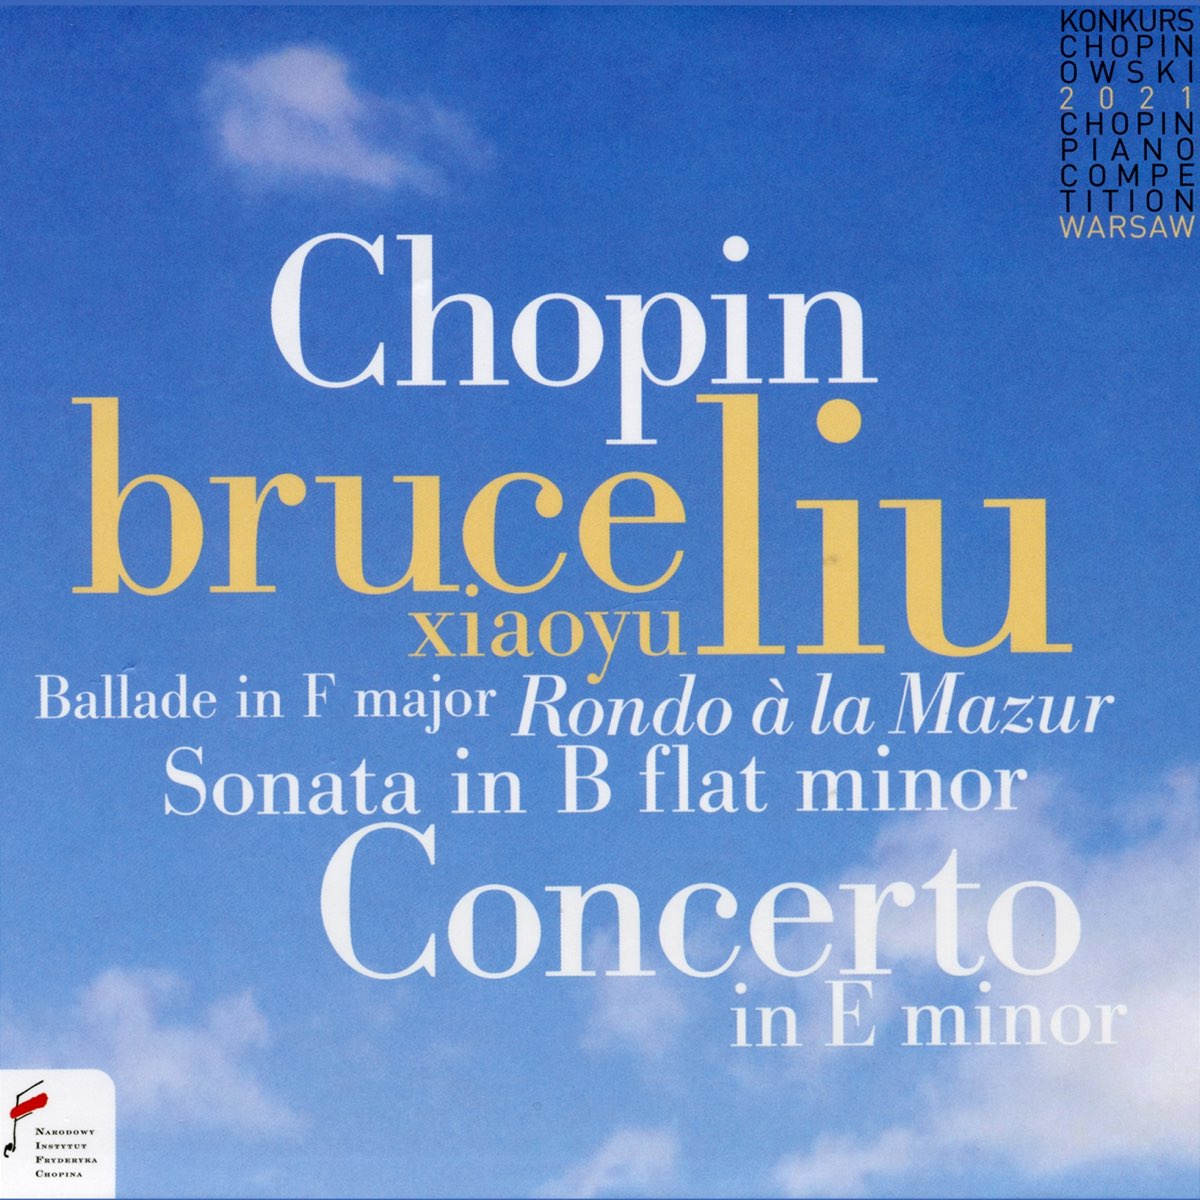 ‎Fryderyk Chopin 18th Chopin Piano Competition Warsaw by Bruce Liu on